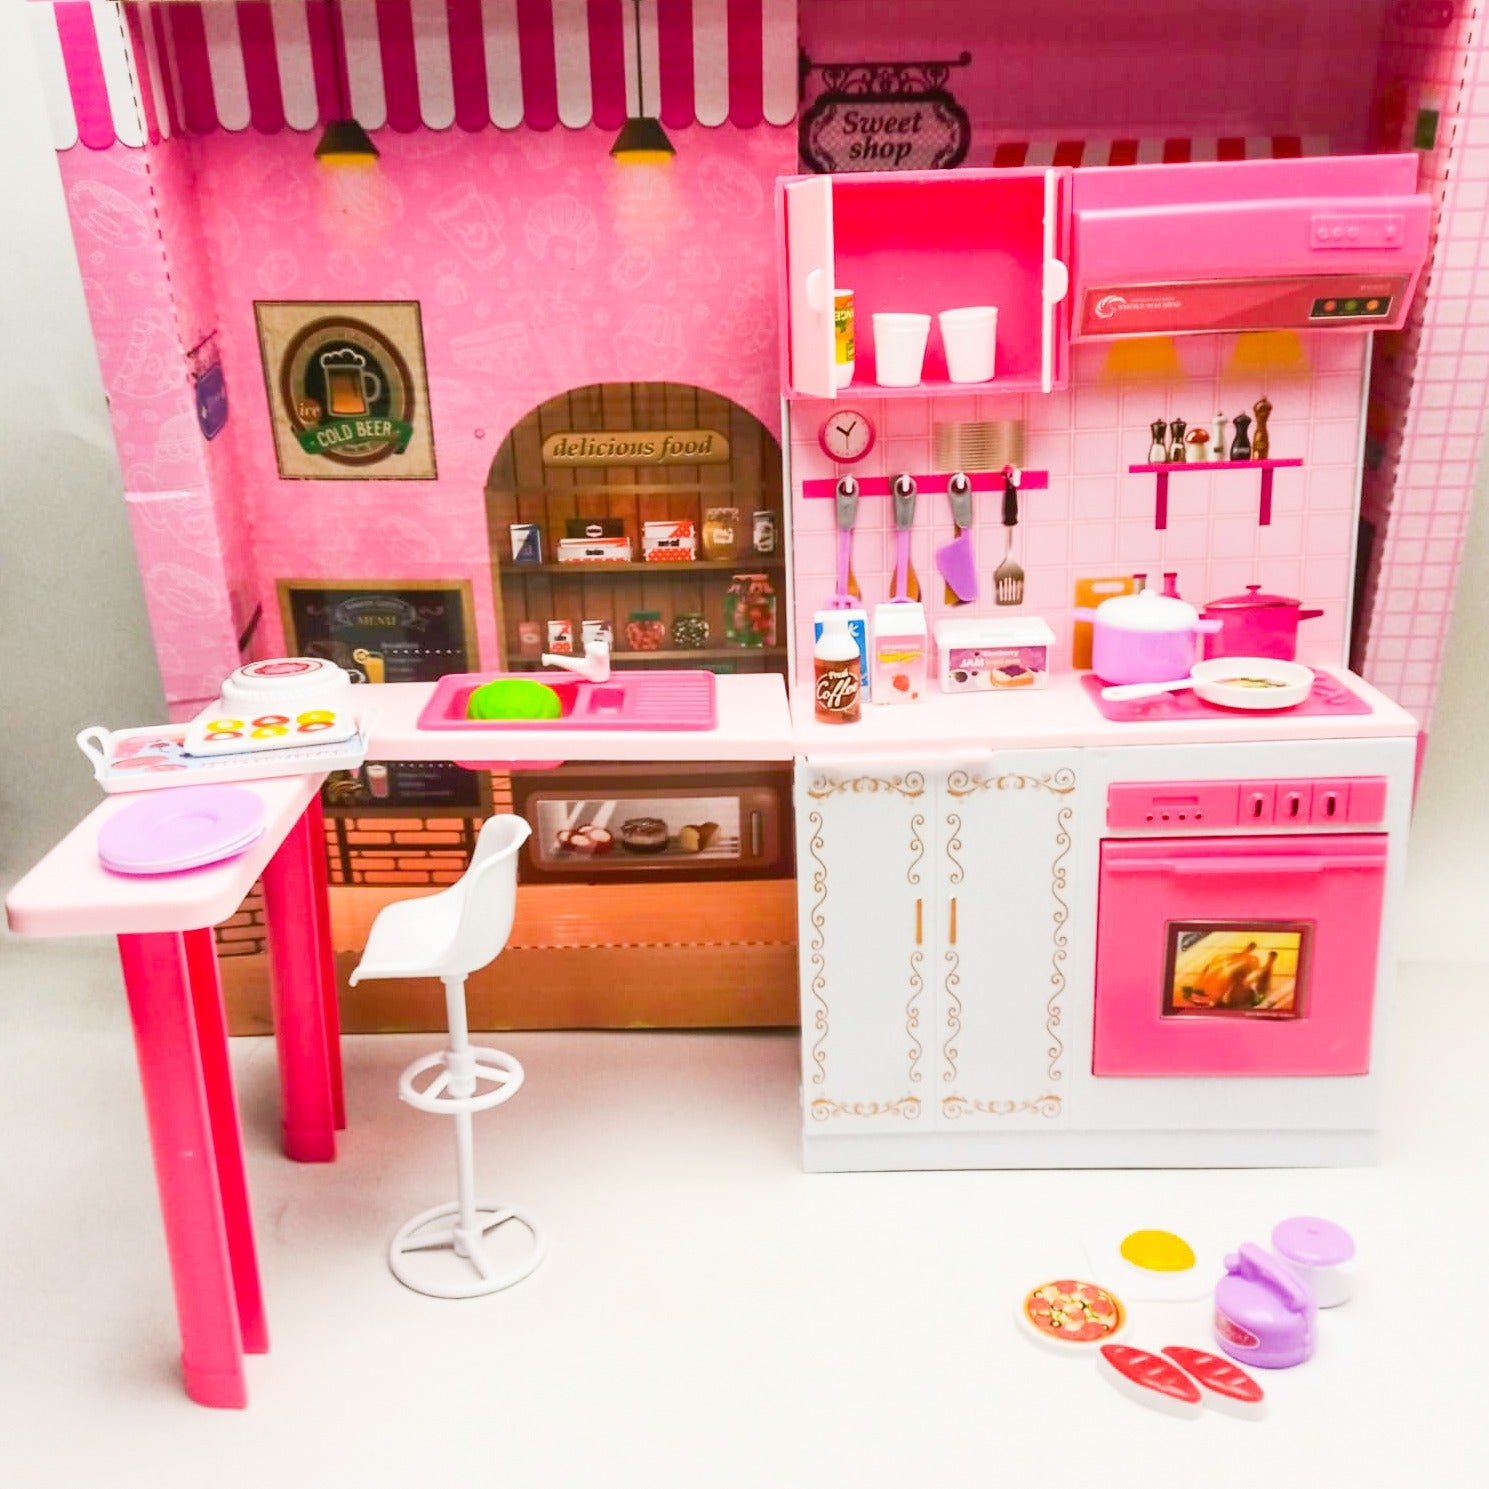 My Happy Kitchen Playset For Your Little Ones, Perfect For Gift